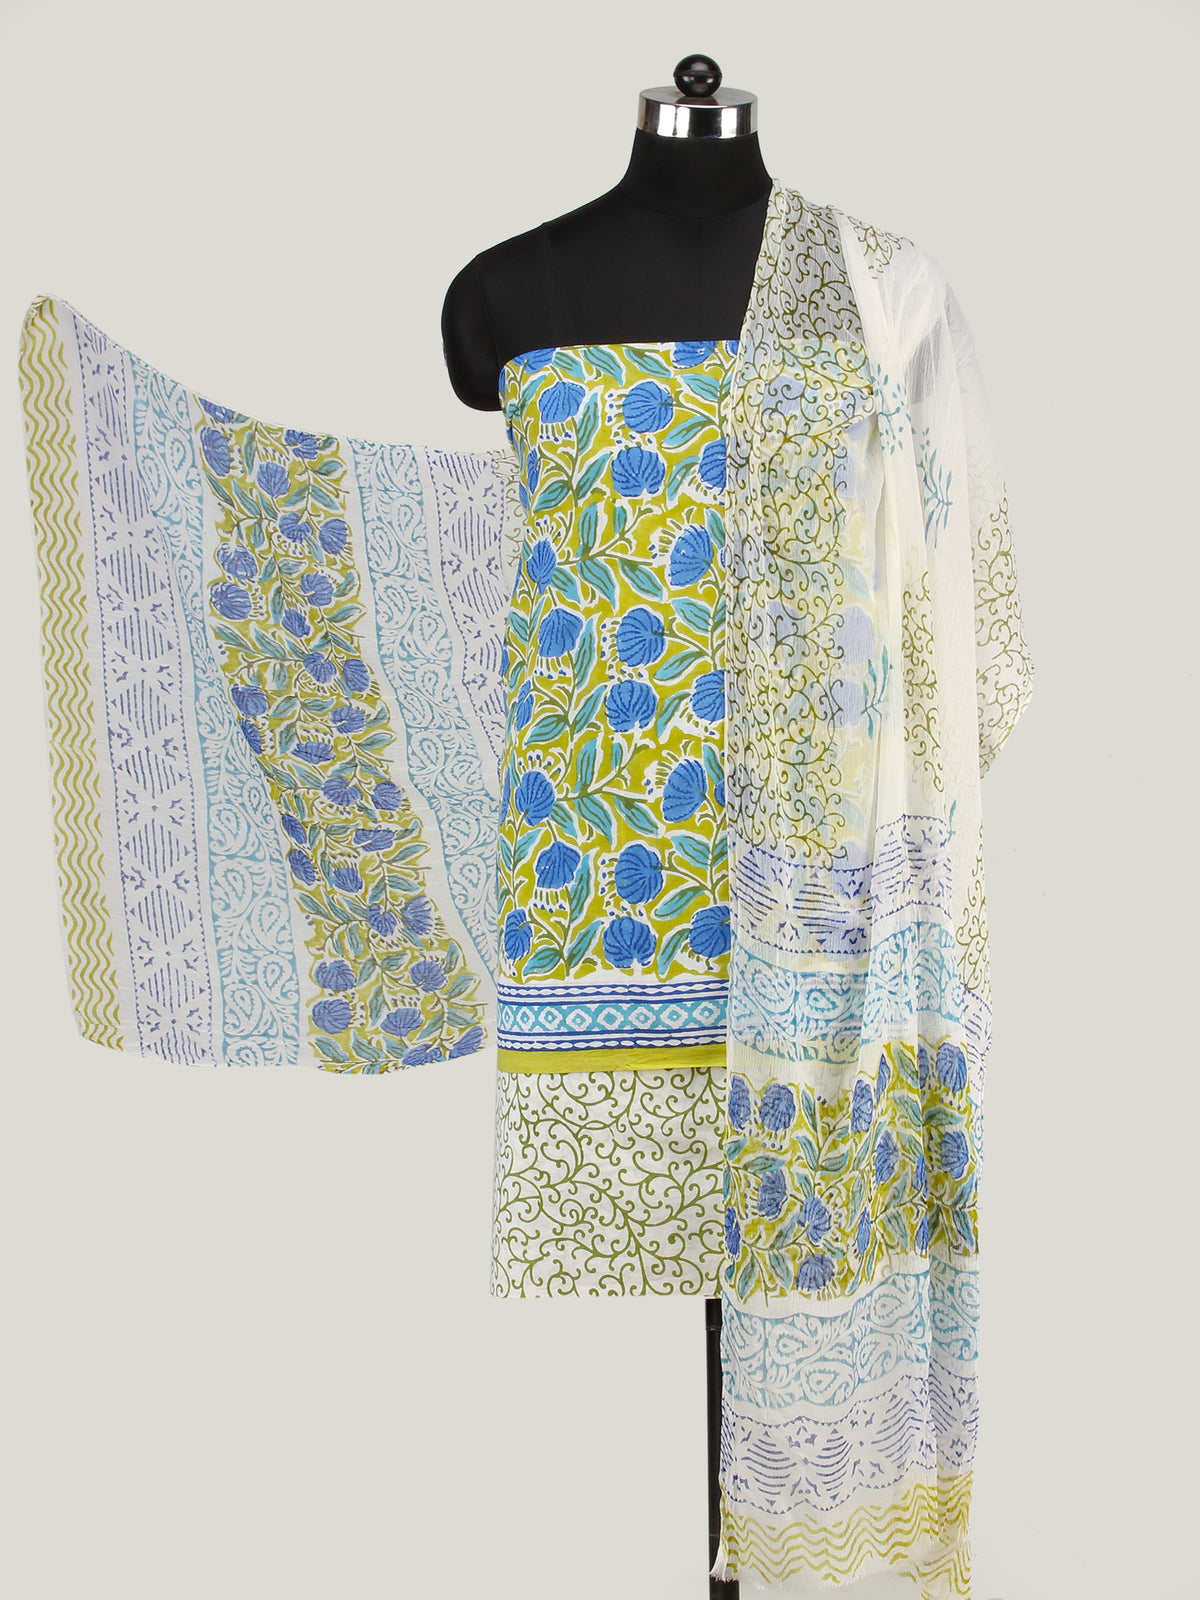 Olive Green White Blue Hand Block Printed Cotton Suit-Salwar Fabric With Chiffon Dupatta (Set of 3) - SU01HB441